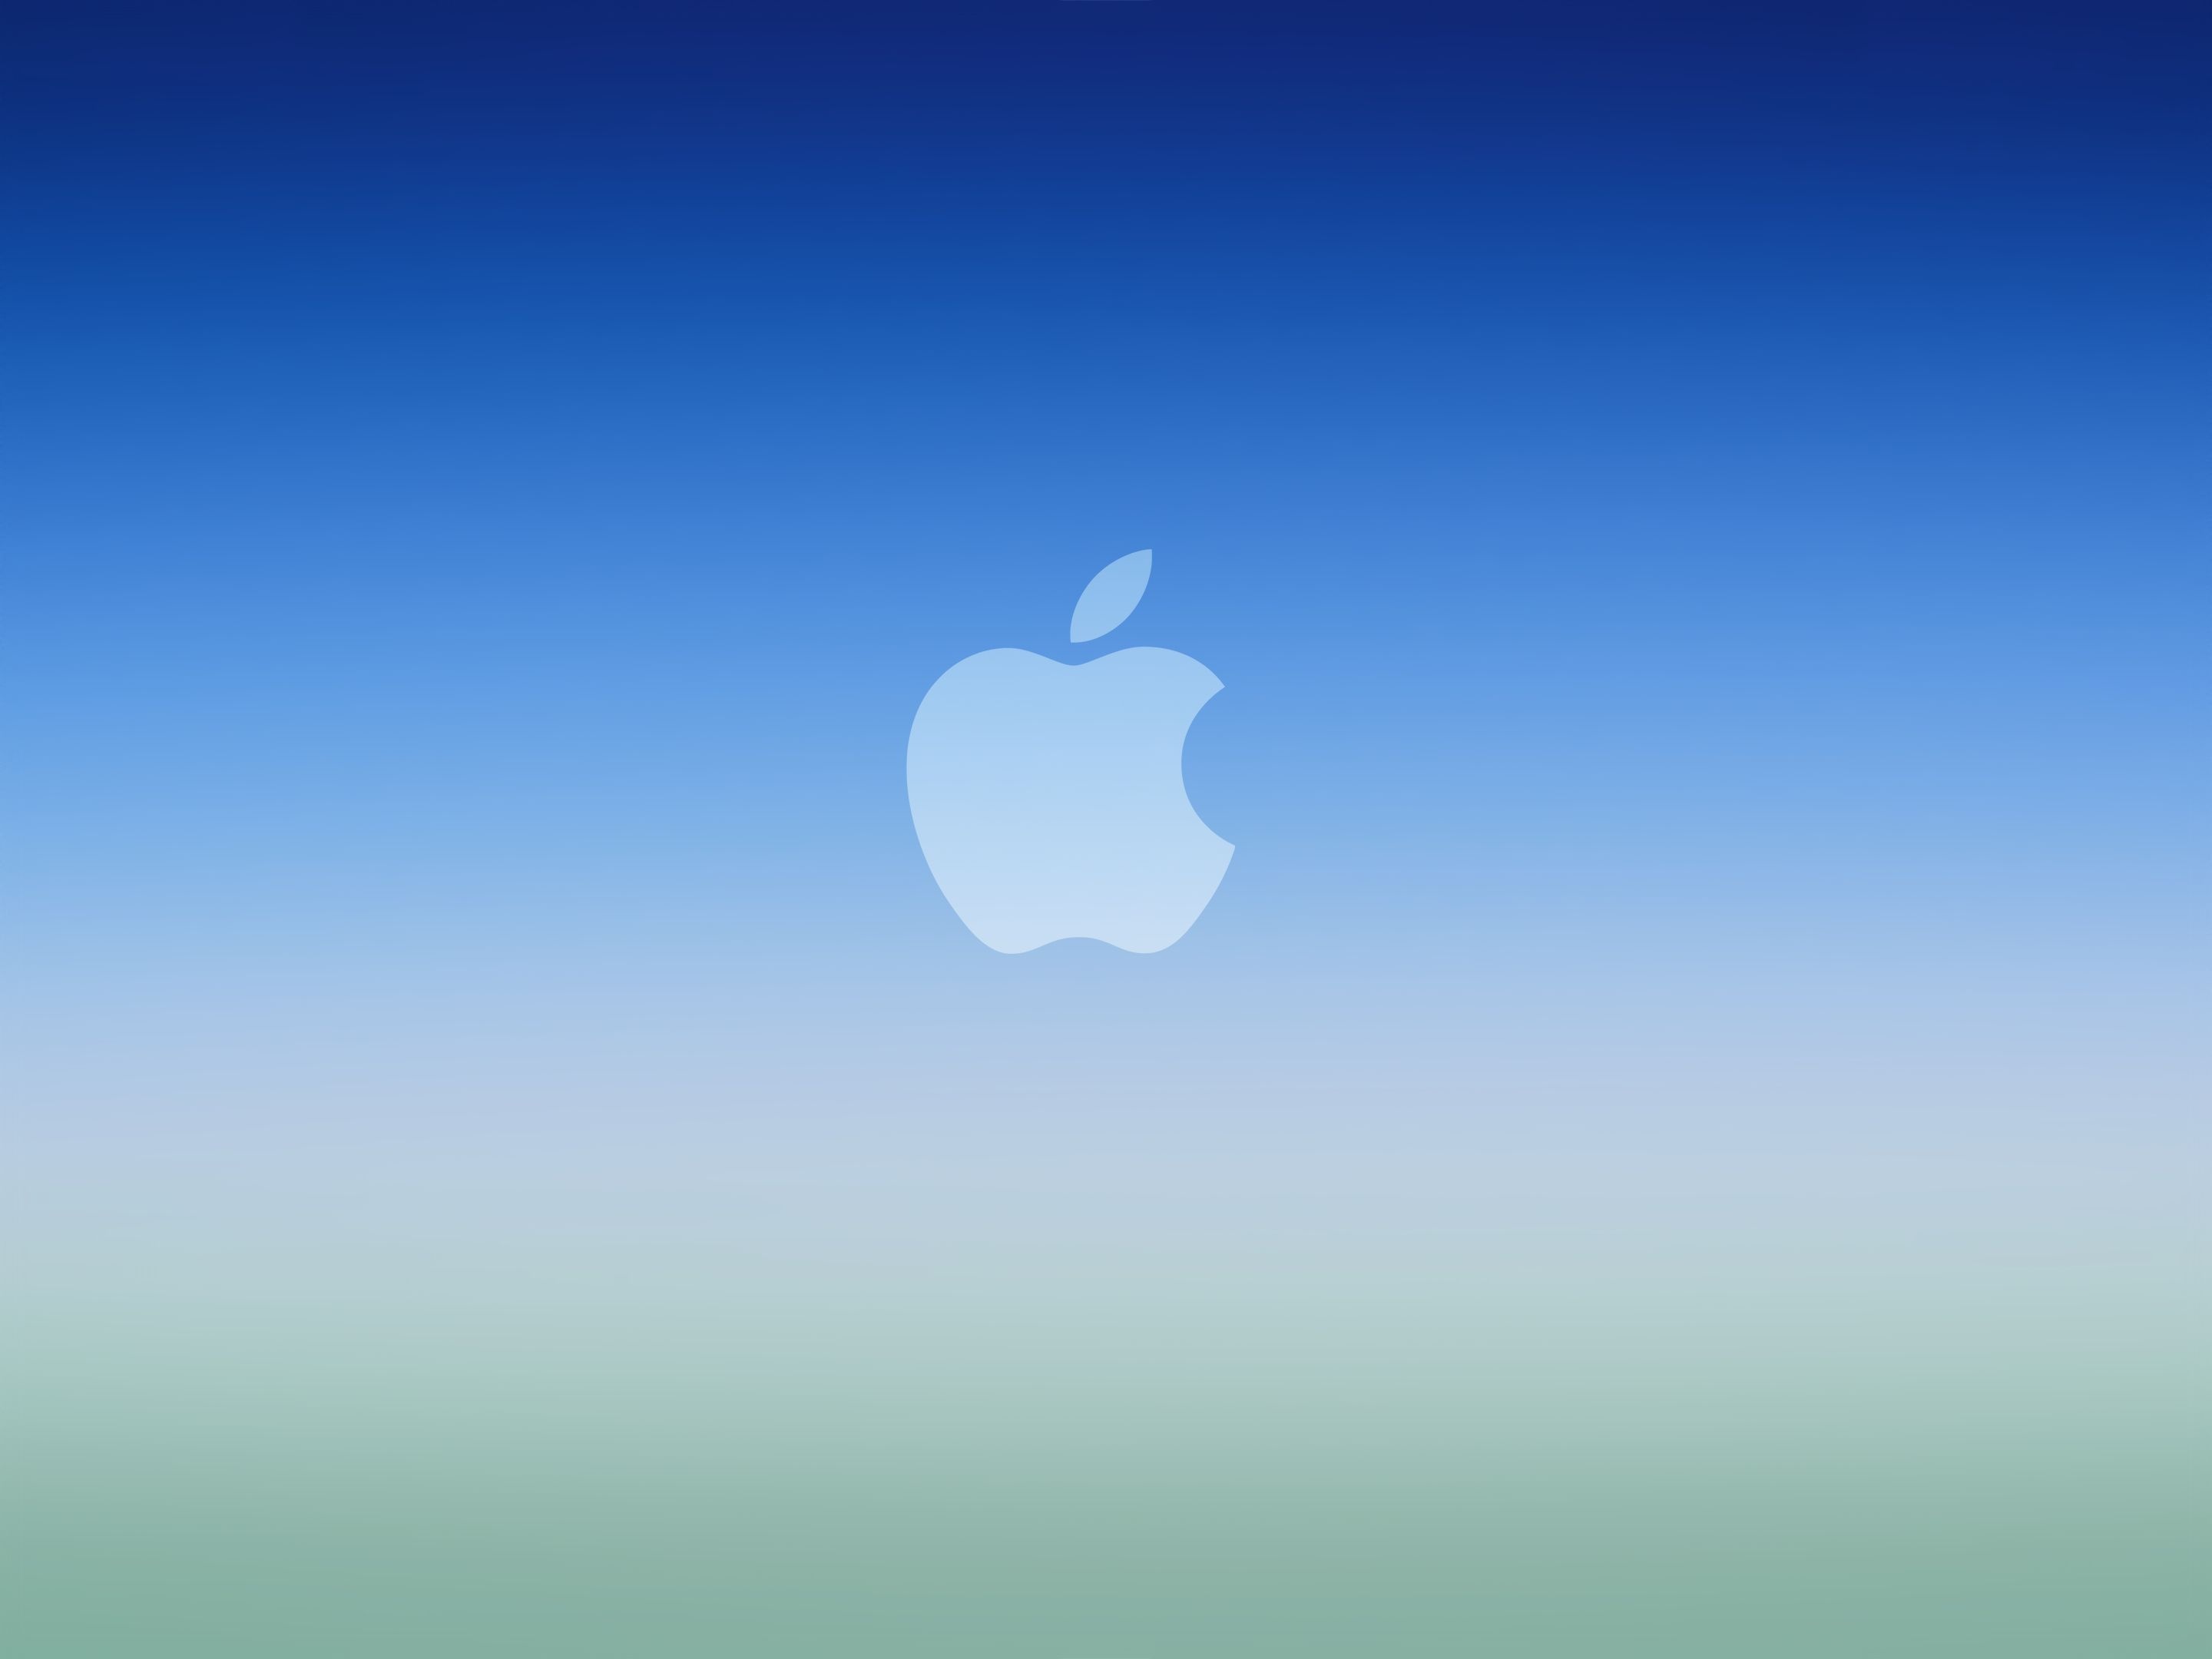 iMac Logo, Gradient OS X wallpapers, Smooth and elegant, Striking color transitions, 2880x2160 HD Desktop